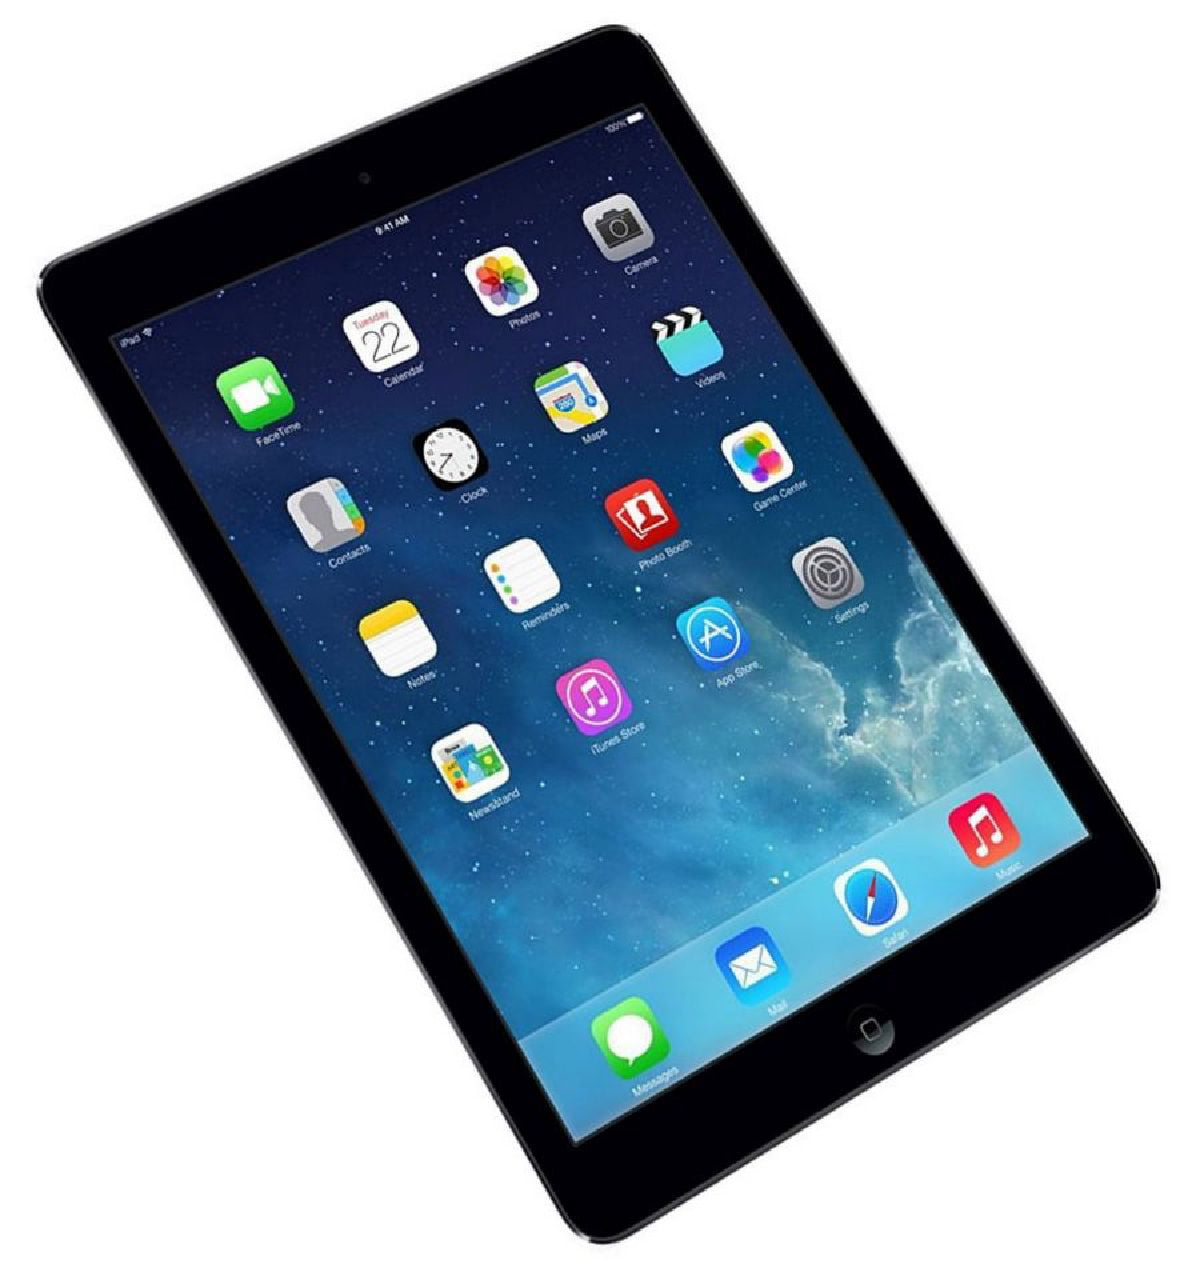 Apple iPad Air 1st Gen MD787LL/A 9.7 inch (WiFi Only) Tablet - 64GB